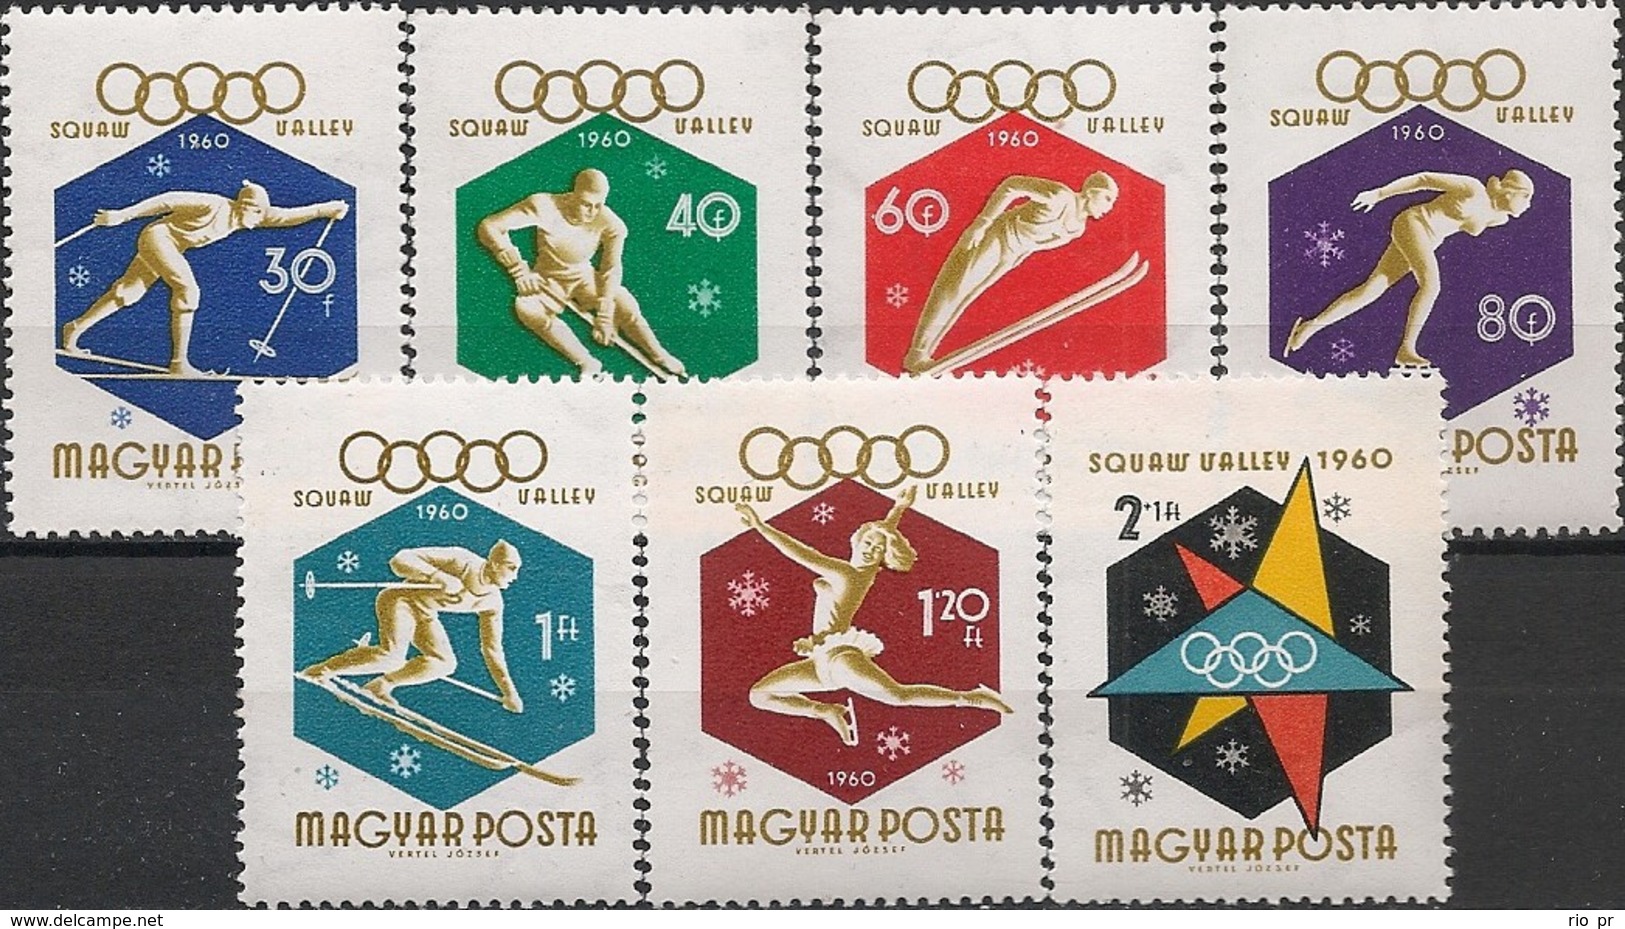 HUNGARY - COMPLETE SET SQUAW VALLEY'60 WINTER OLYMPIC GAMES 1960 - MNH - Hiver 1960: Squaw Valley